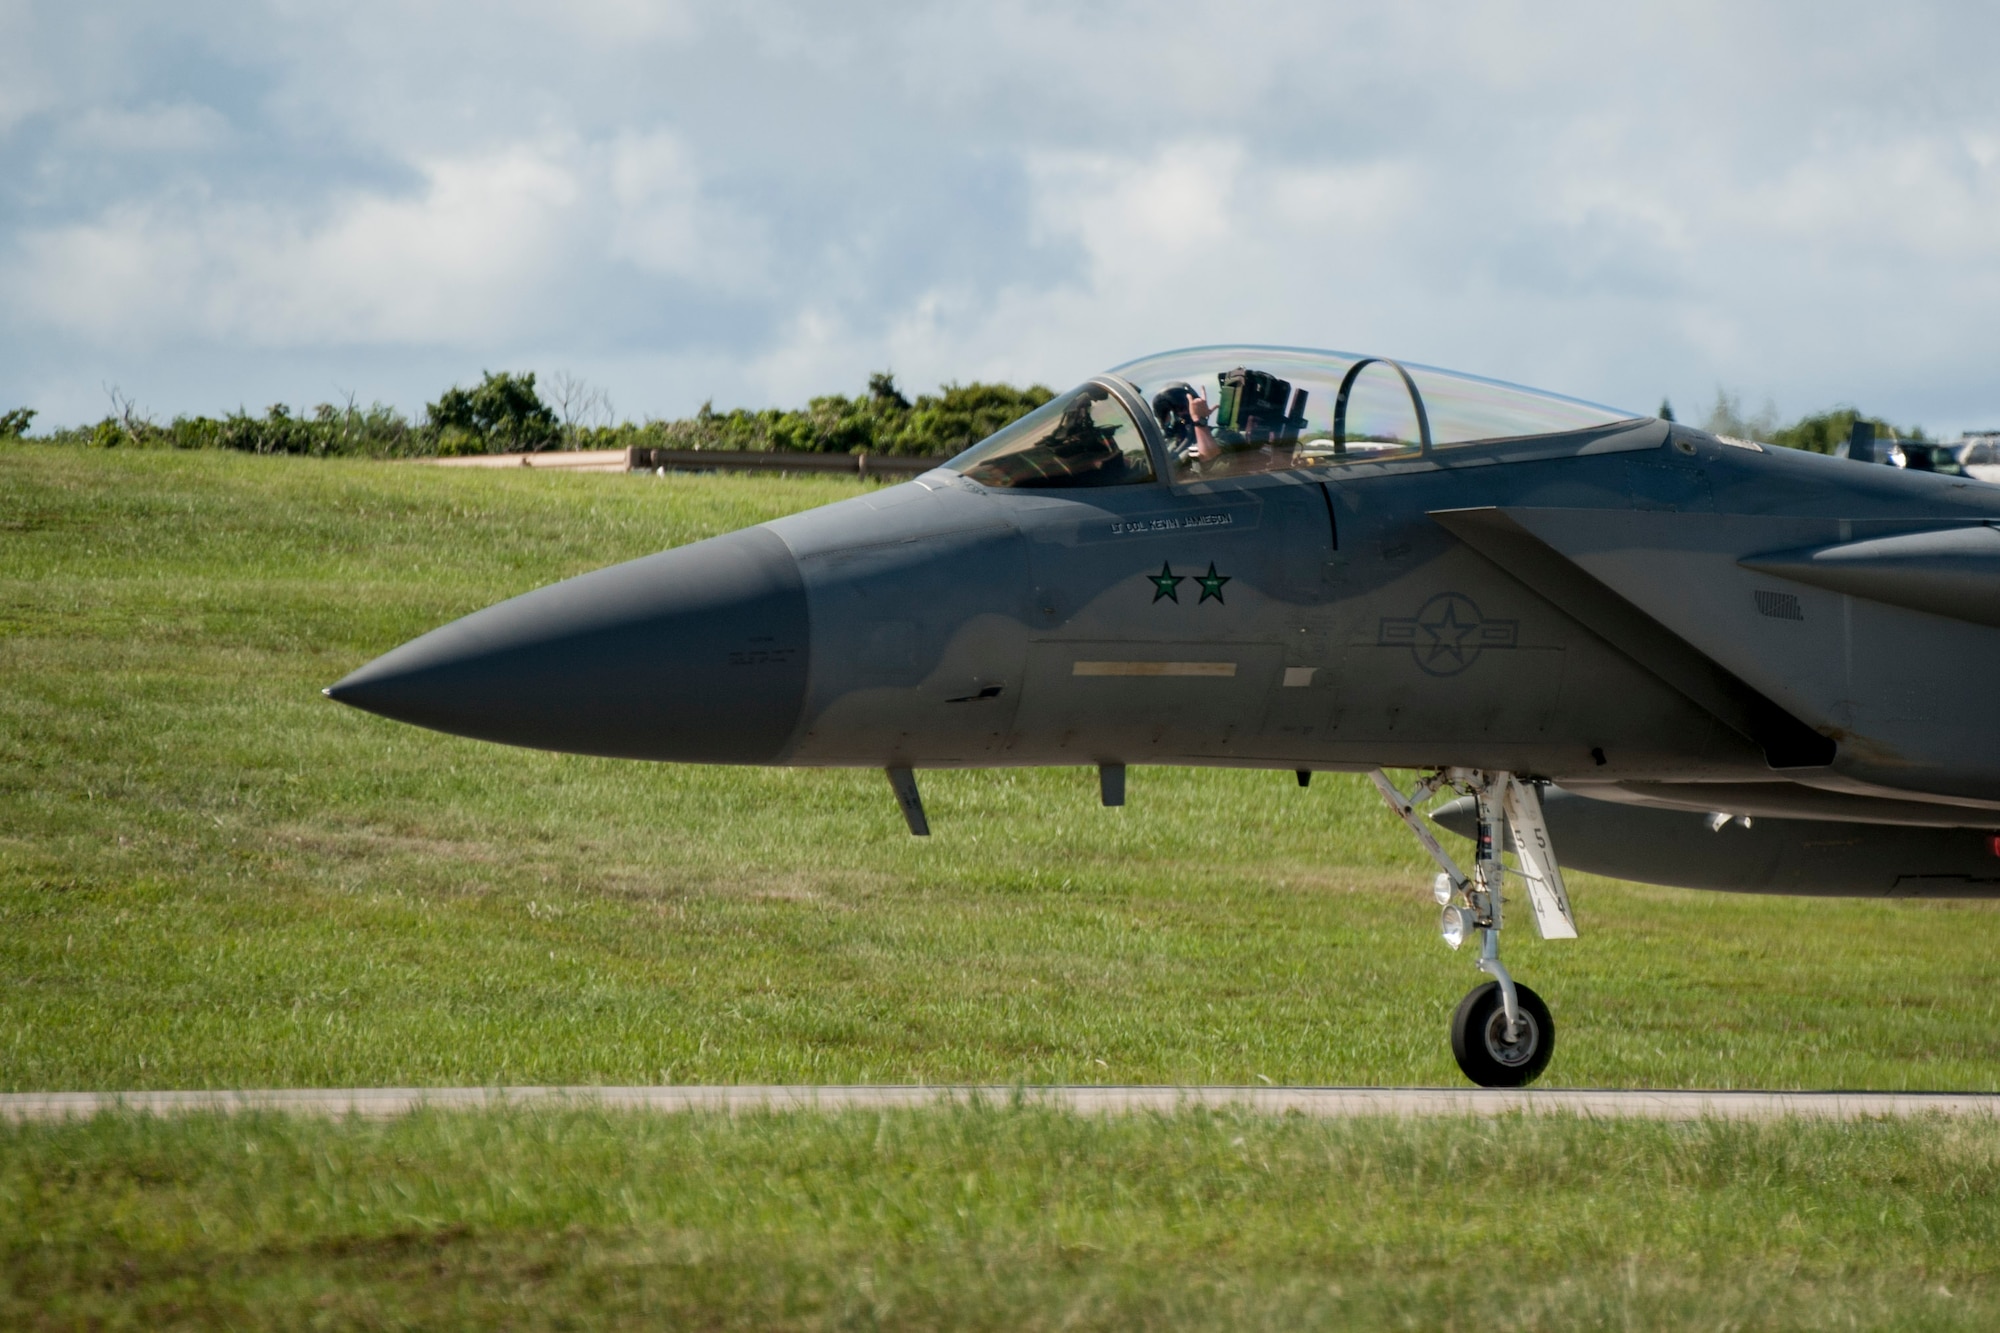 A 44th Fighter Squadron F-15 Eagle taxis on the flight line July 27, 2016, at Kadena Air Base, Japan. Pilots bear the responsibility of defending Okinawa and Japan from adversaries seeking to harm U.S. and allied partners within the Indo-Asian Pacific theater. (U.S. Air Force photo by Senior Airman Peter Reft)